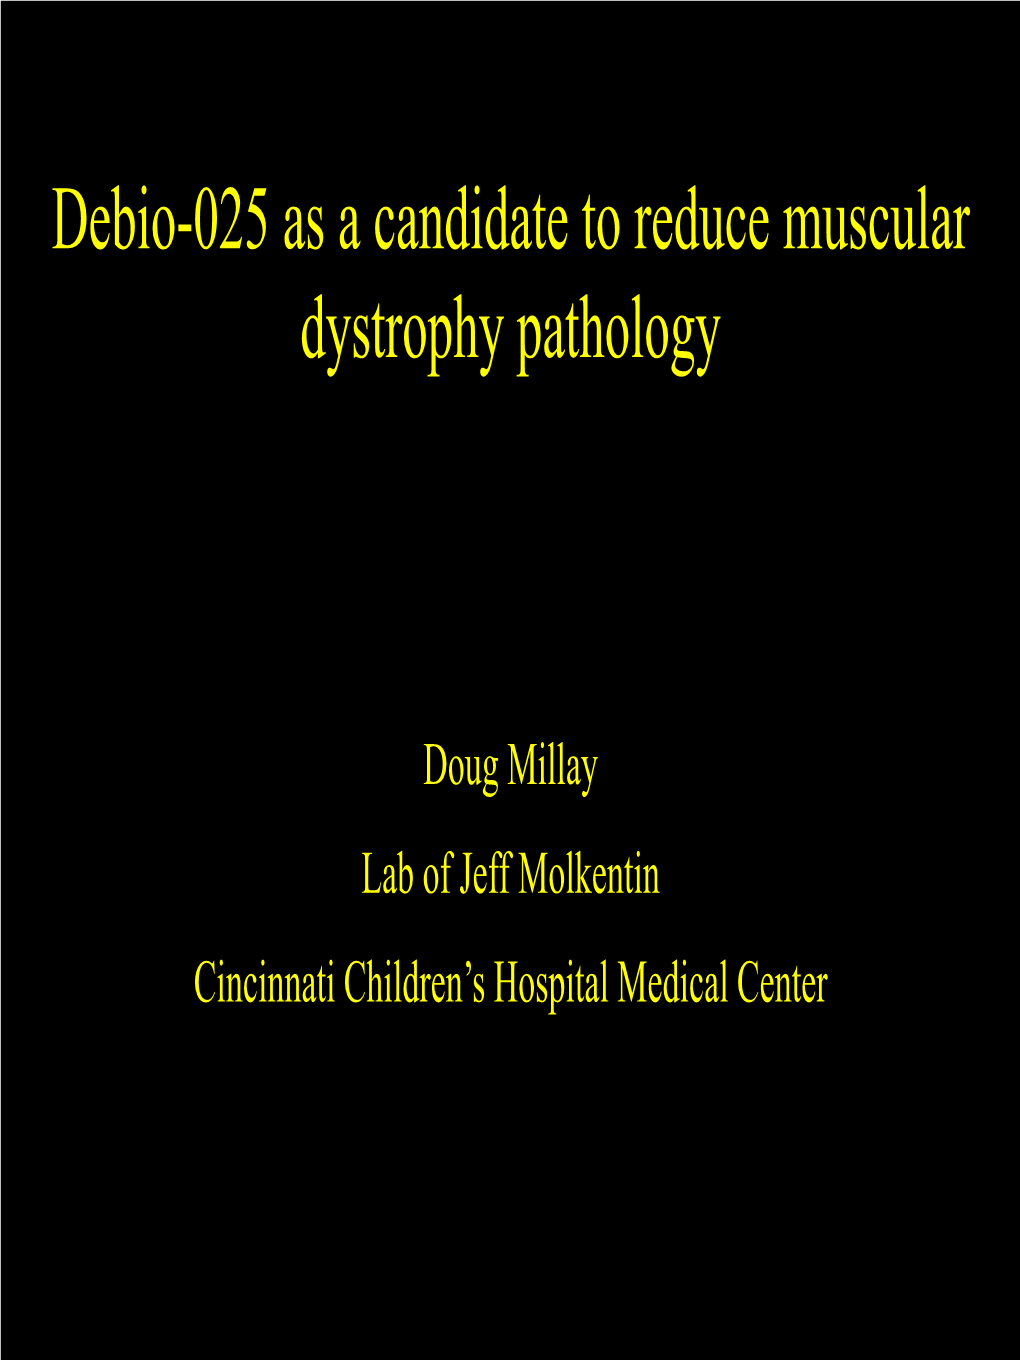 Debio-025 As a Candidate to Reduce Muscular Dystrophy Pathology